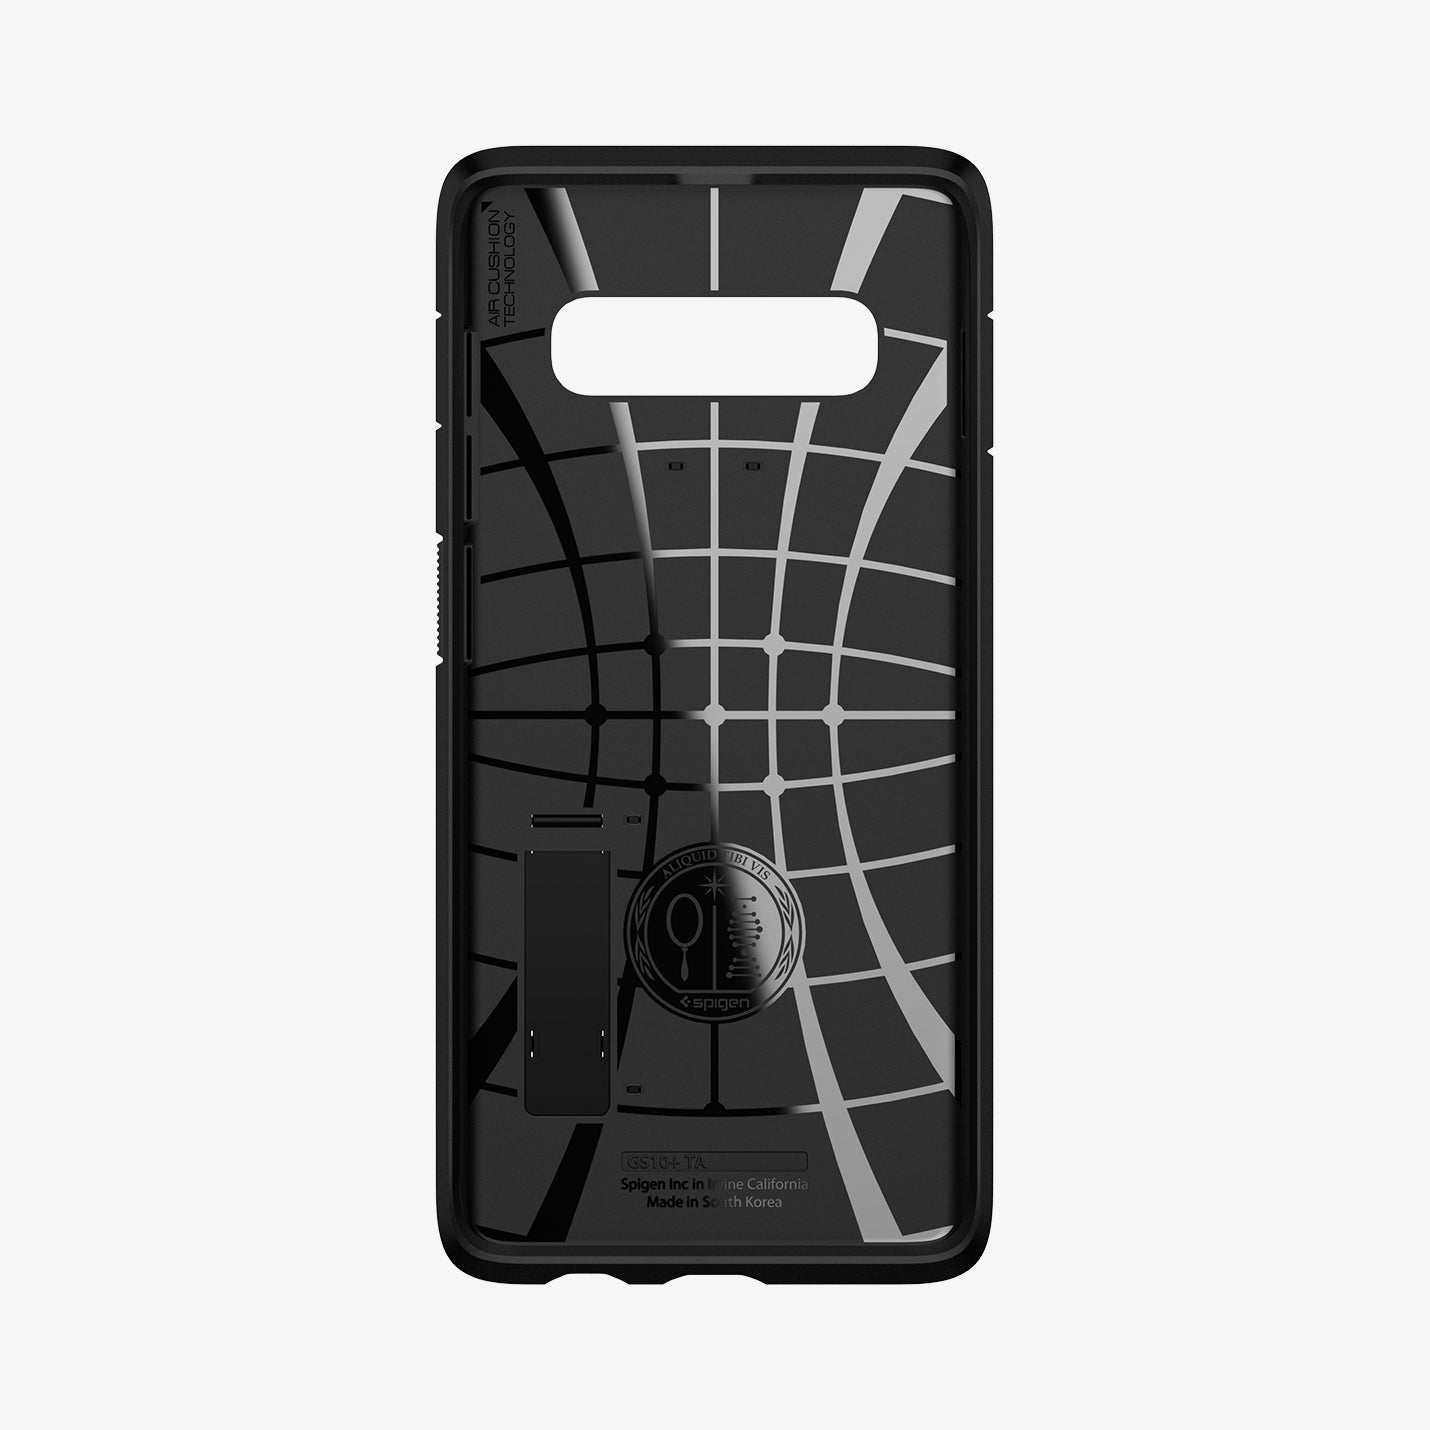 606CS25770 - Galaxy S10 Plus Tough Armor Case in black showing the inside of case